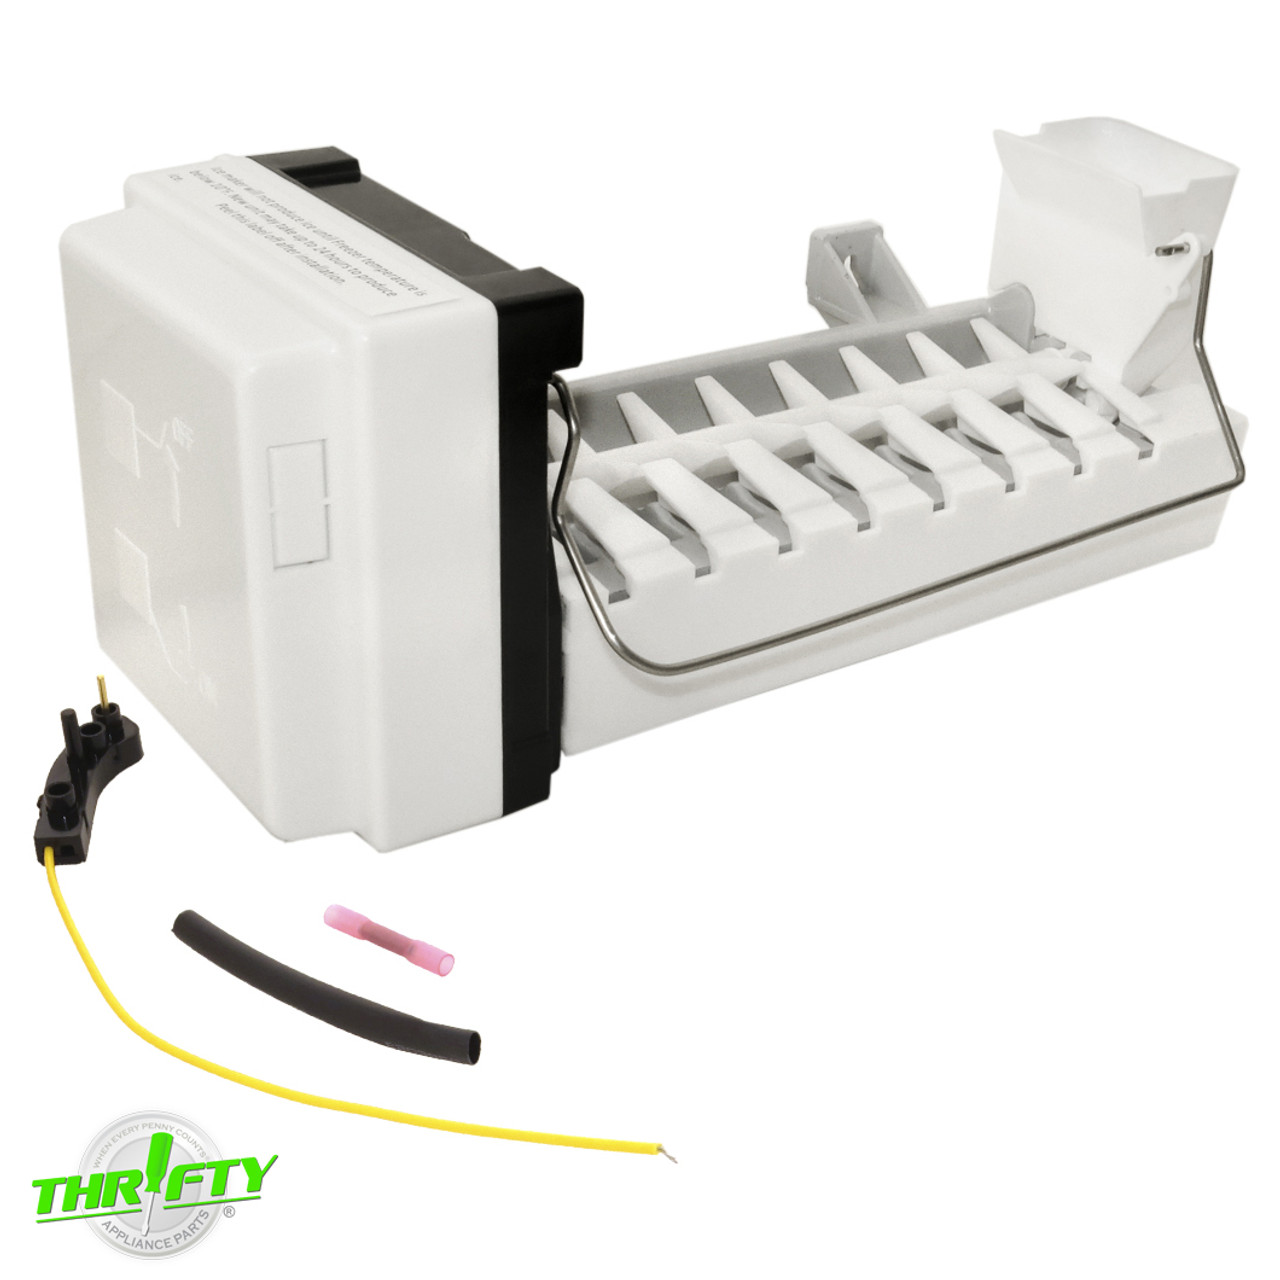 W11577195 Refrigerator Ice Maker Replacement for Whirlpool / Maytag /  KitchenAid > Speedy Appliance Parts